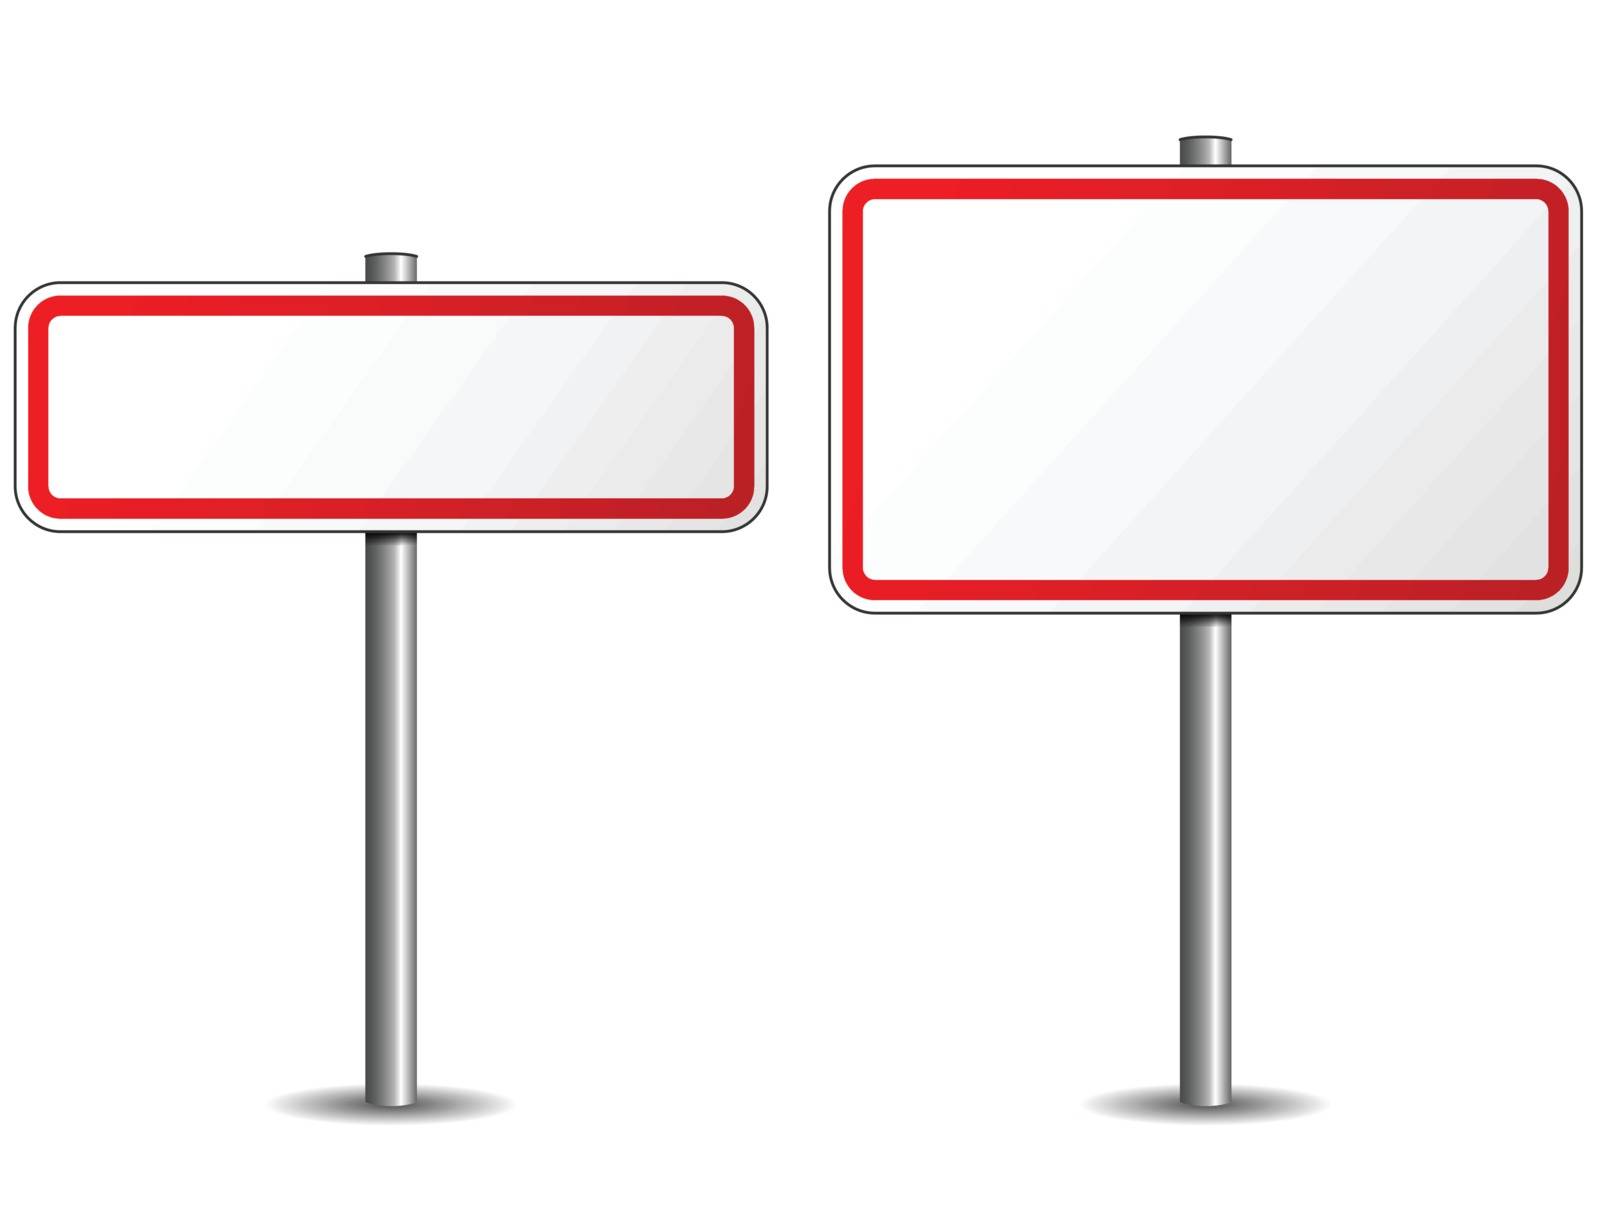 Illustration of two road sign on white background